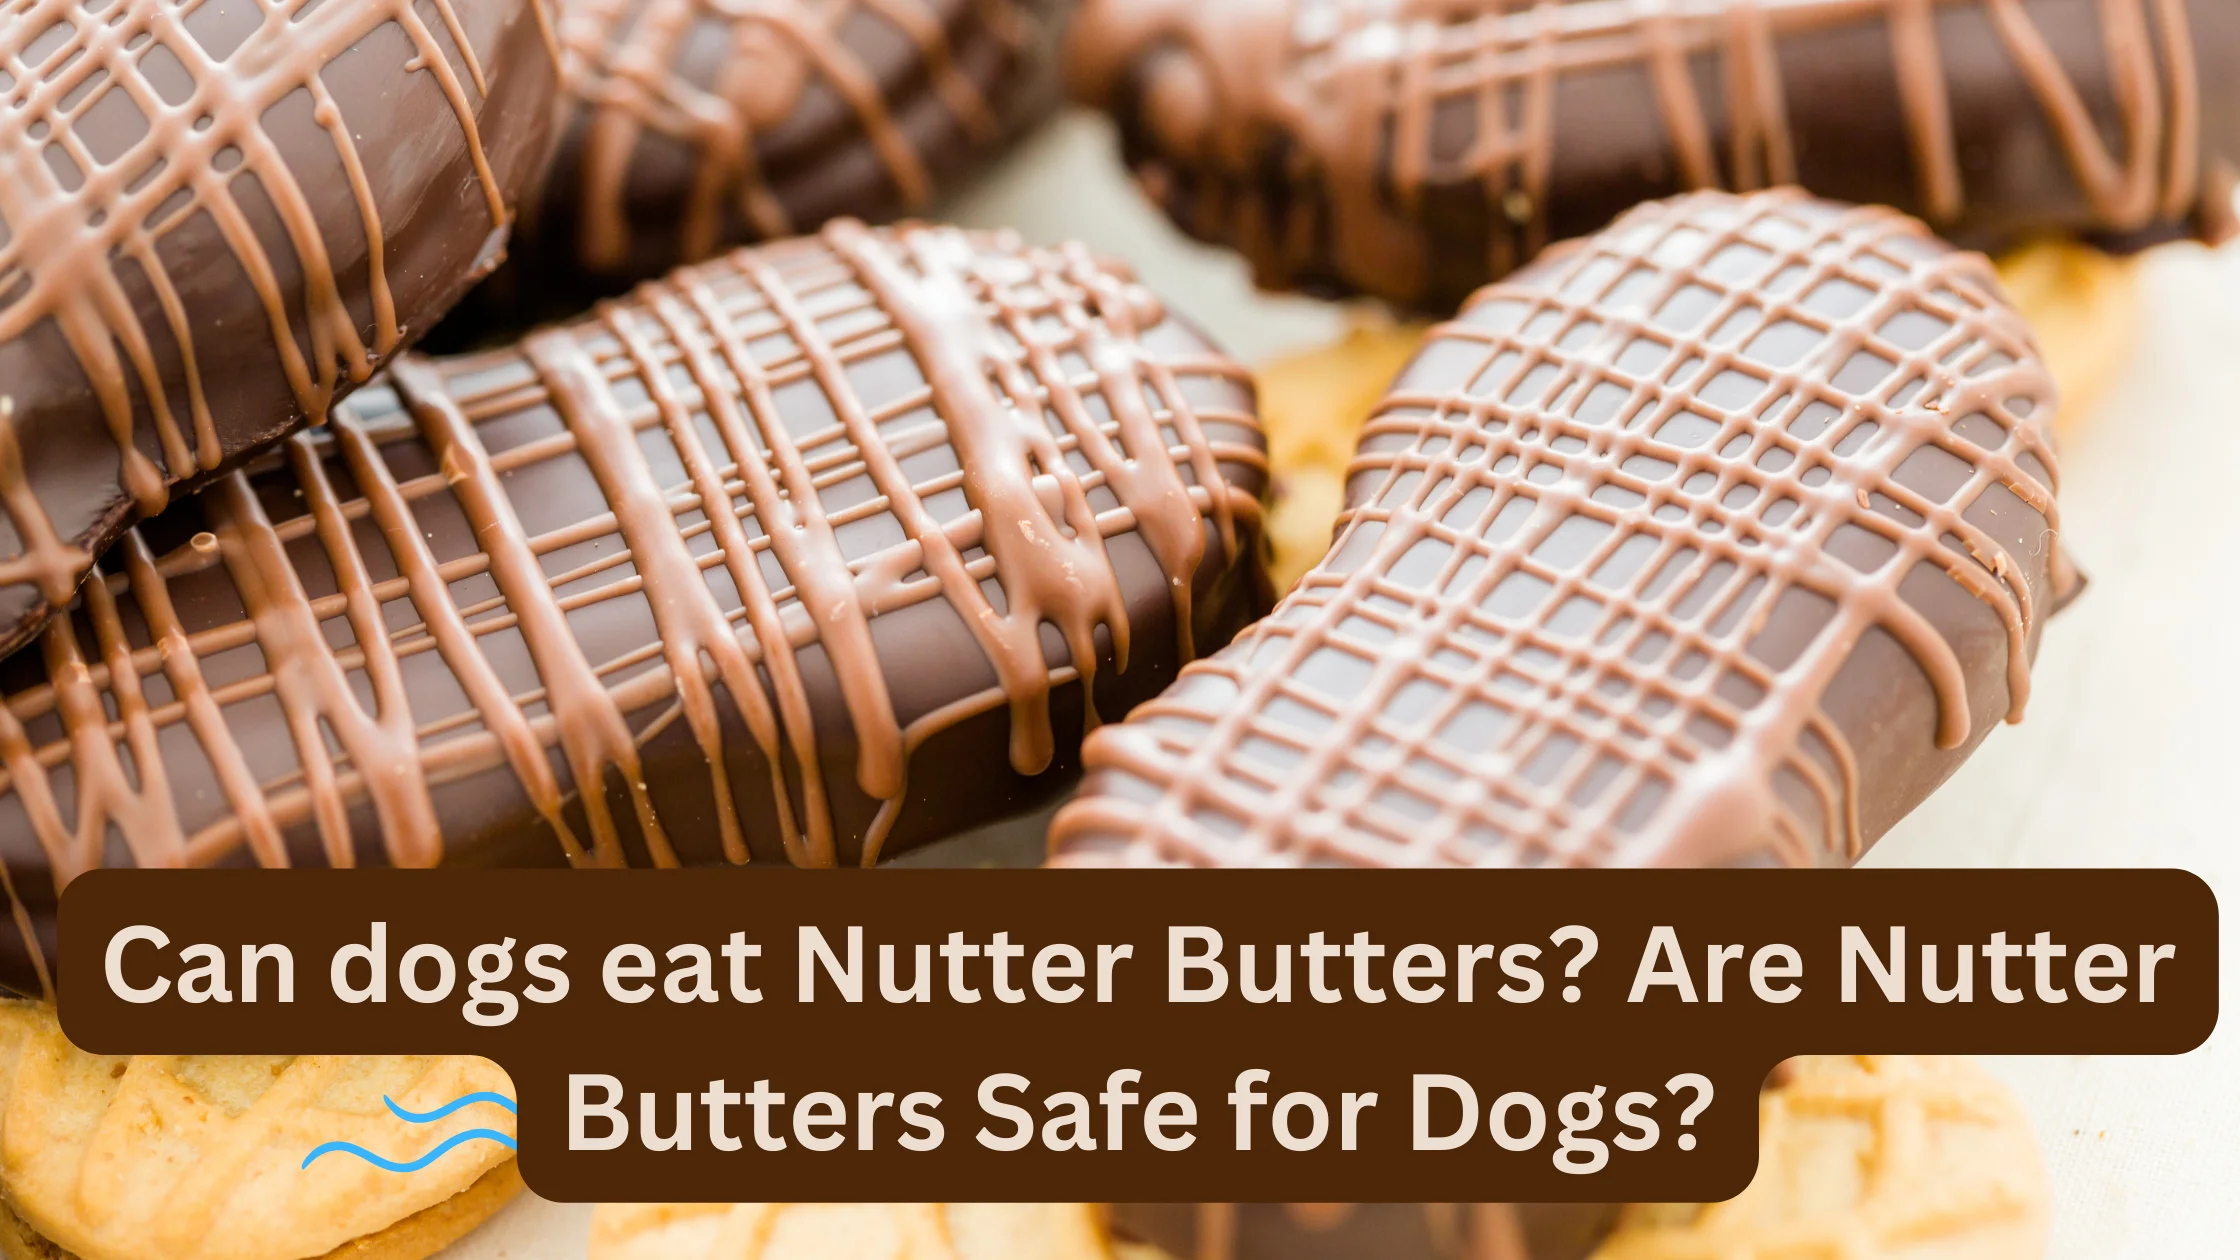 Can dogs eat Nutter Butter? Are Nutter Butters Safe for Dogs?